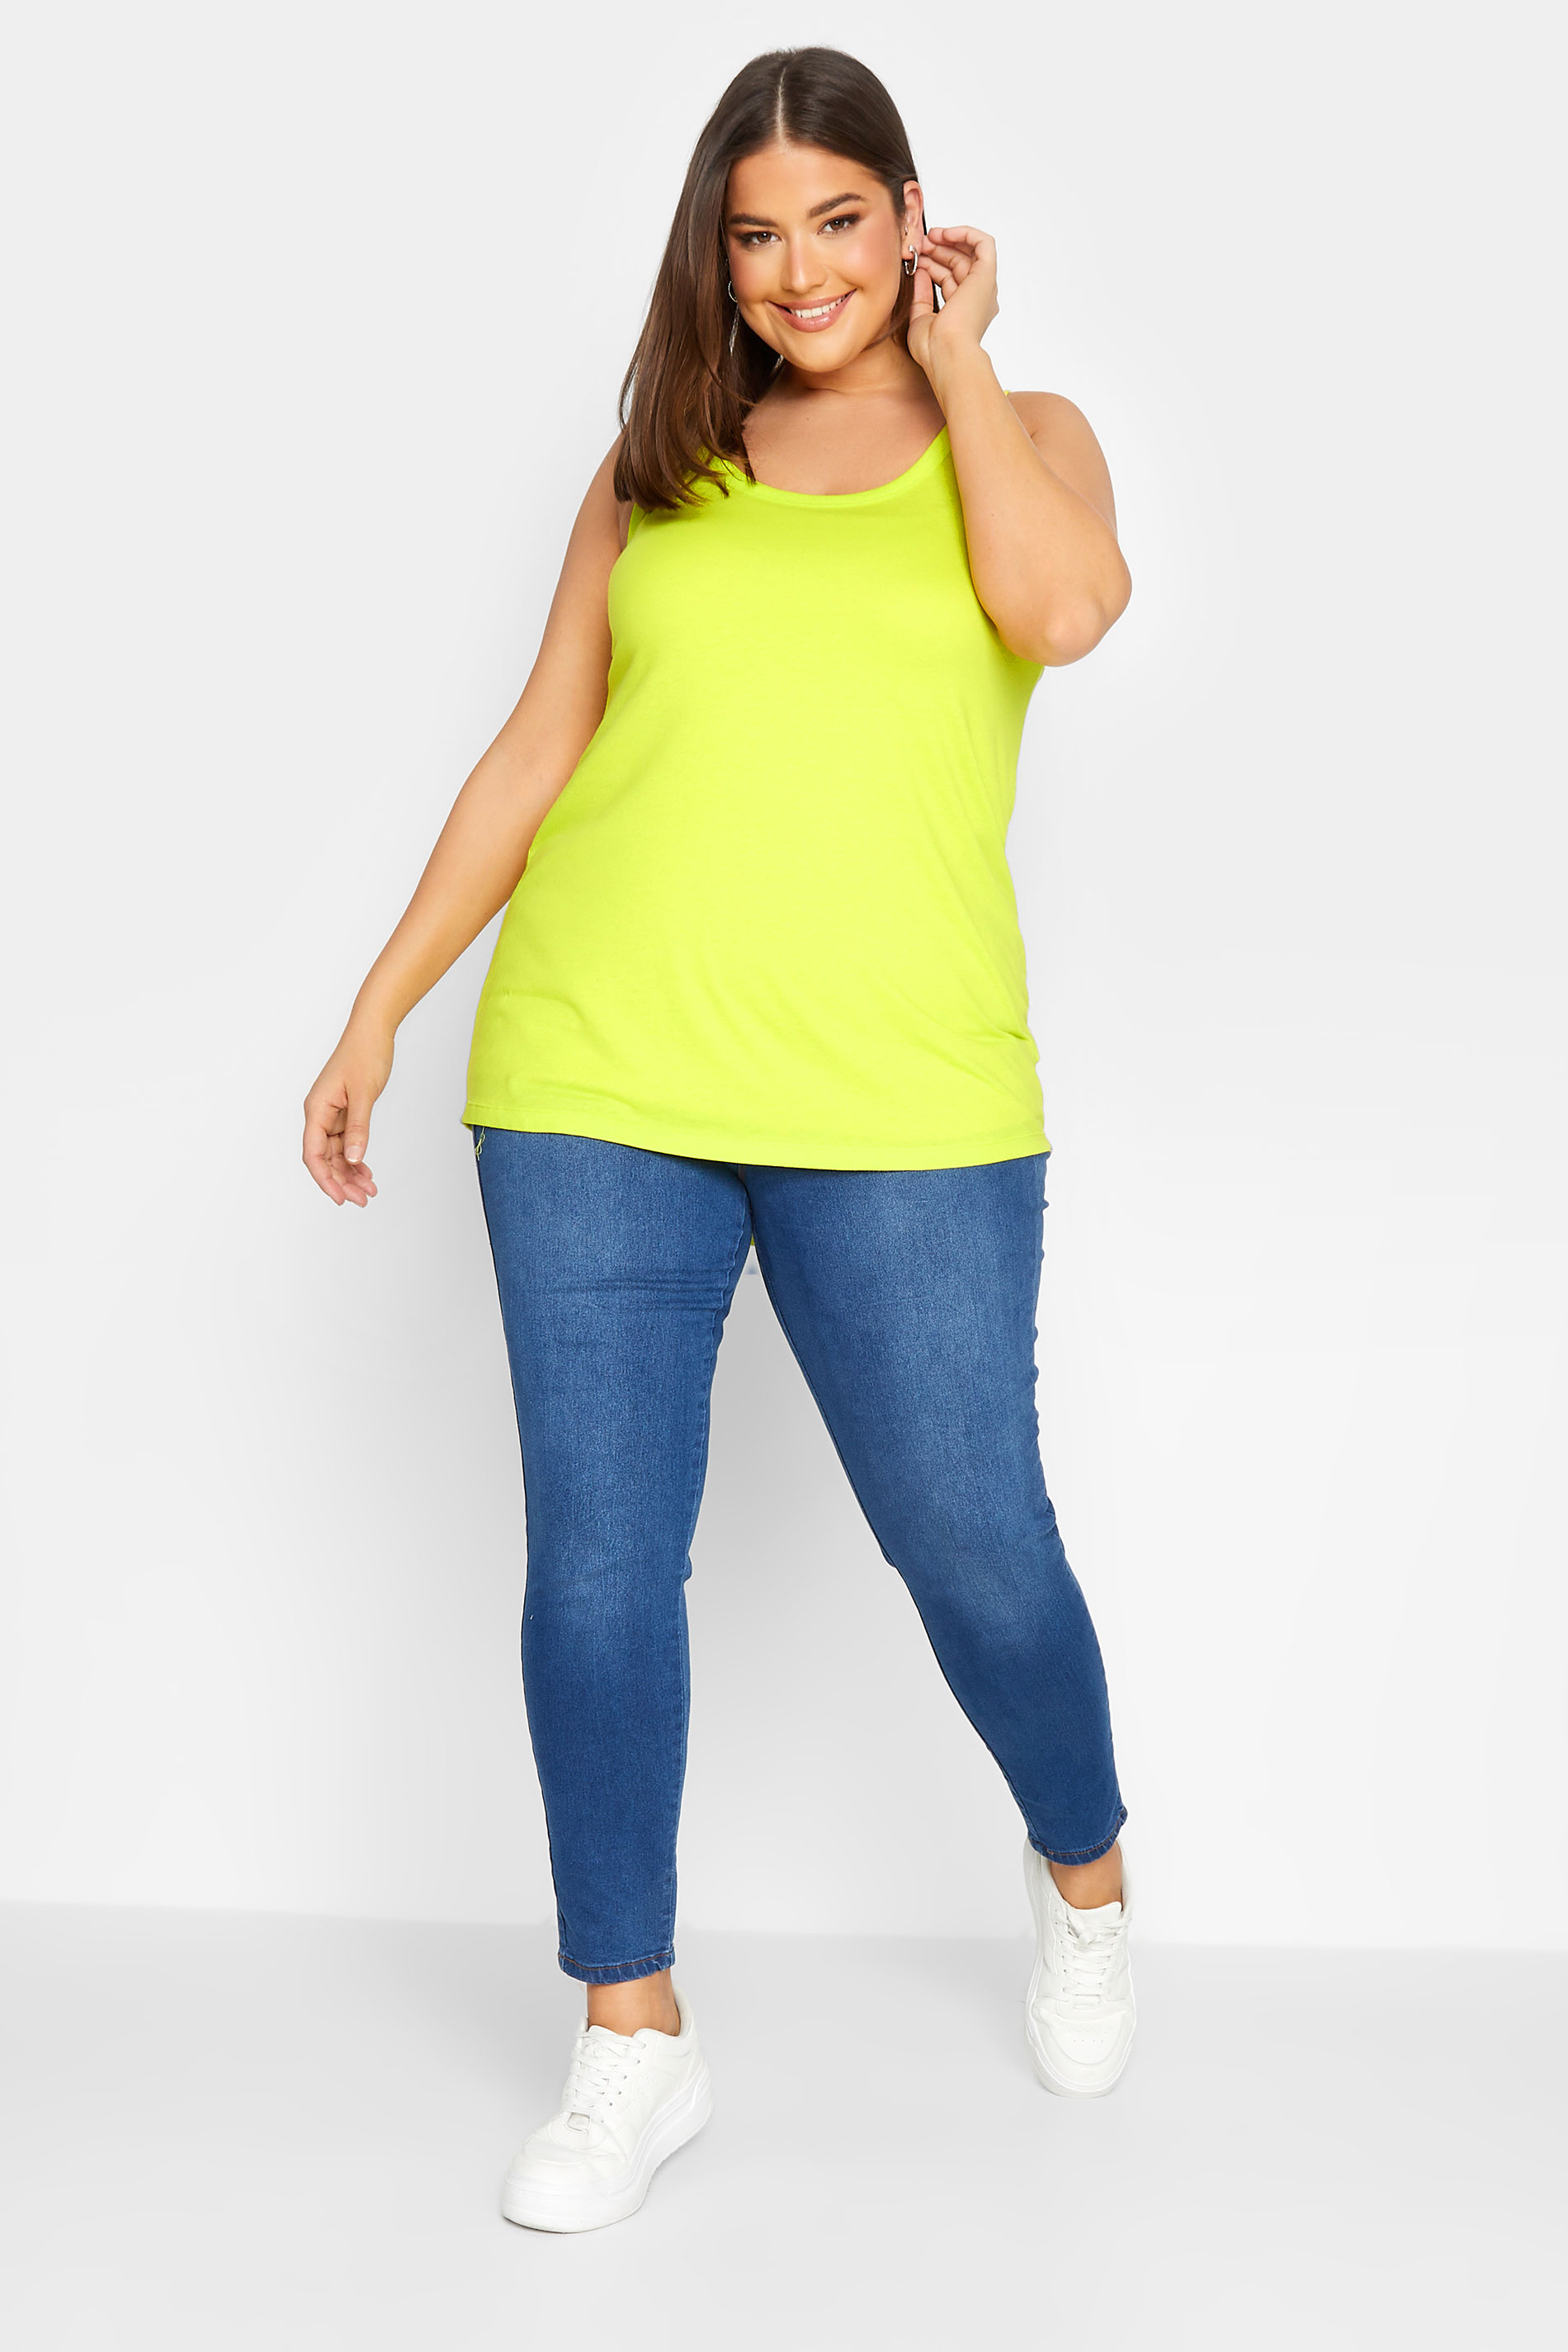 Plus Size Neon Yellow Vest Top | Yours Clothing 2